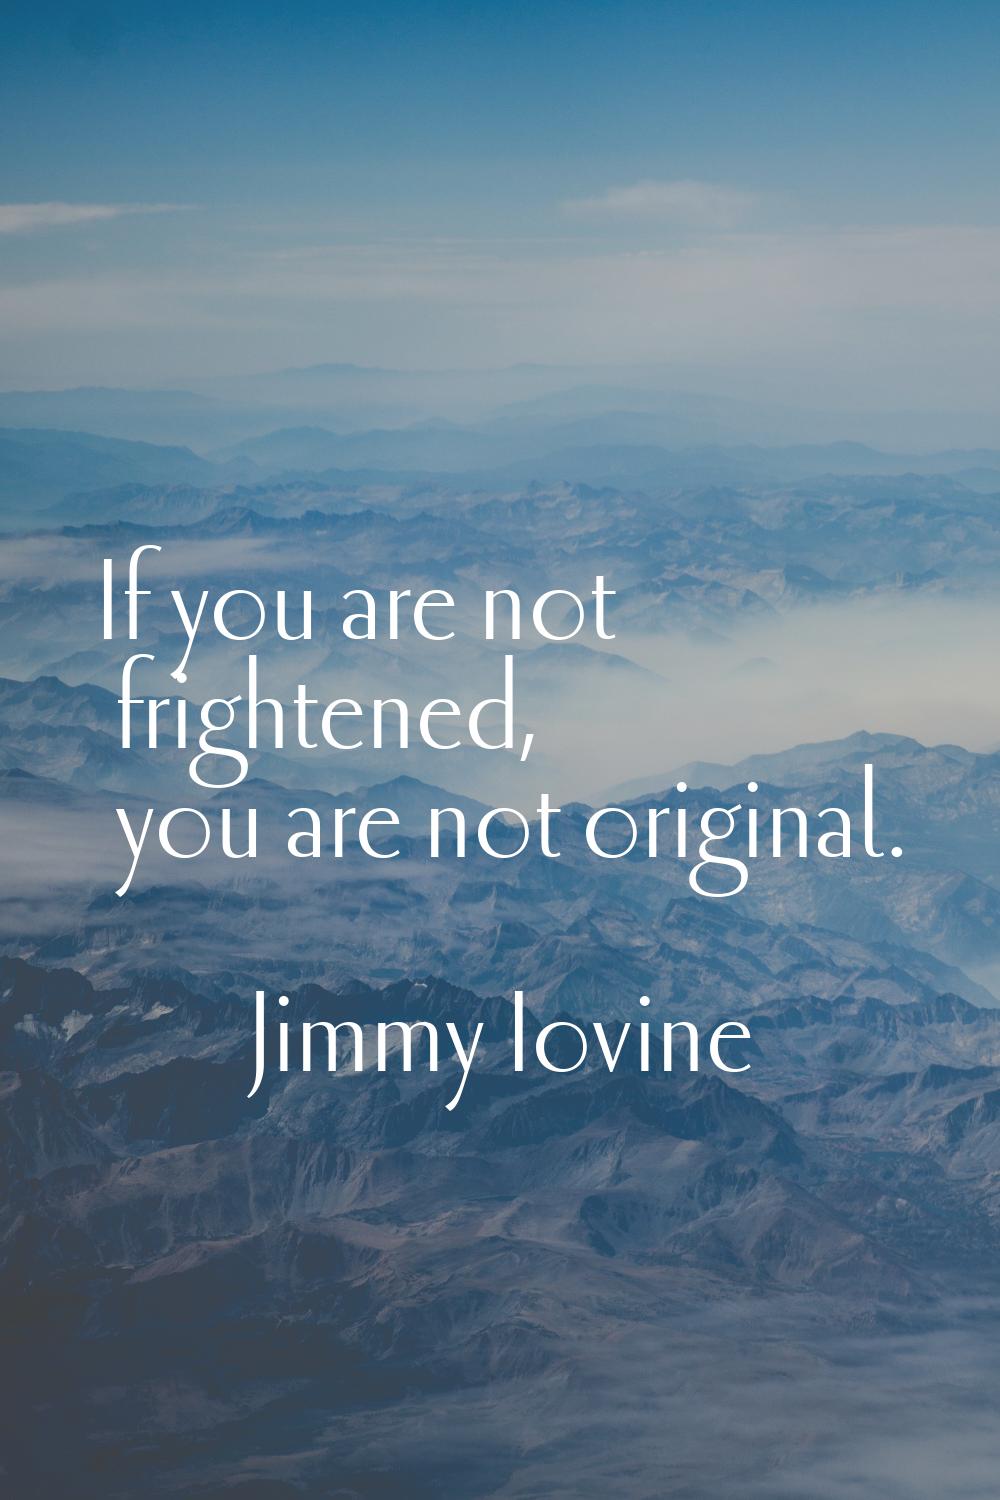 If you are not frightened, you are not original.